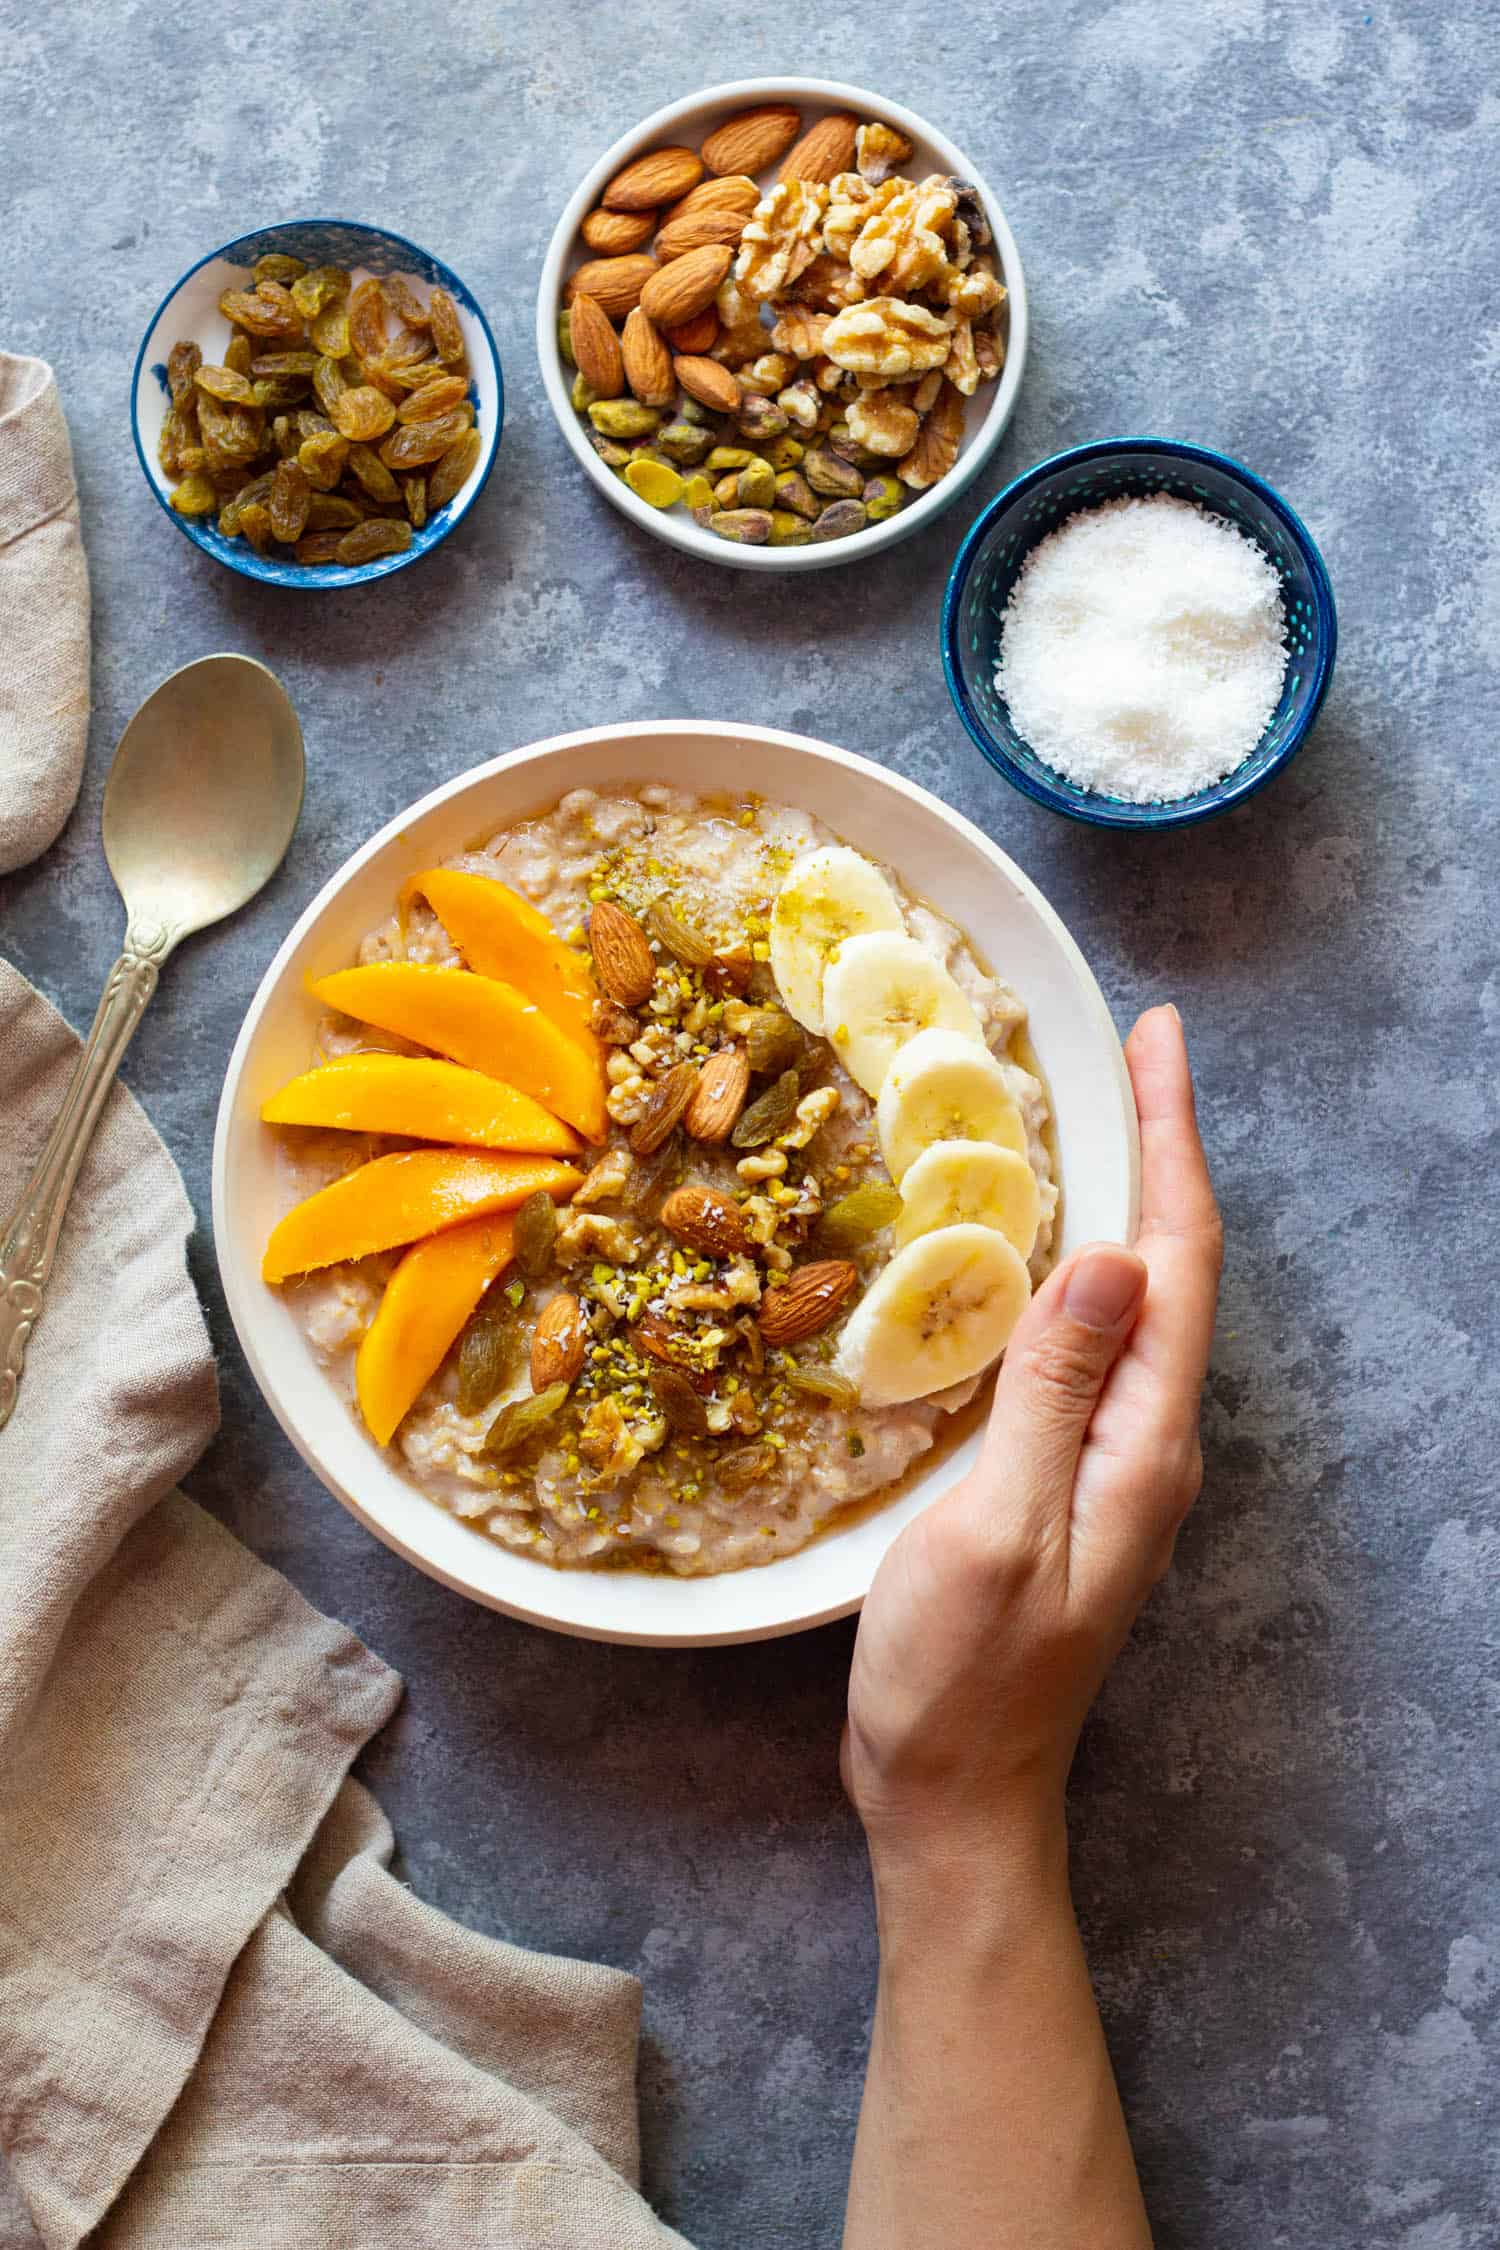 Brighten up your morning with this creamy oatmeal recipe. With additions of cardamom and honey, this breakfast is pretty unique!
